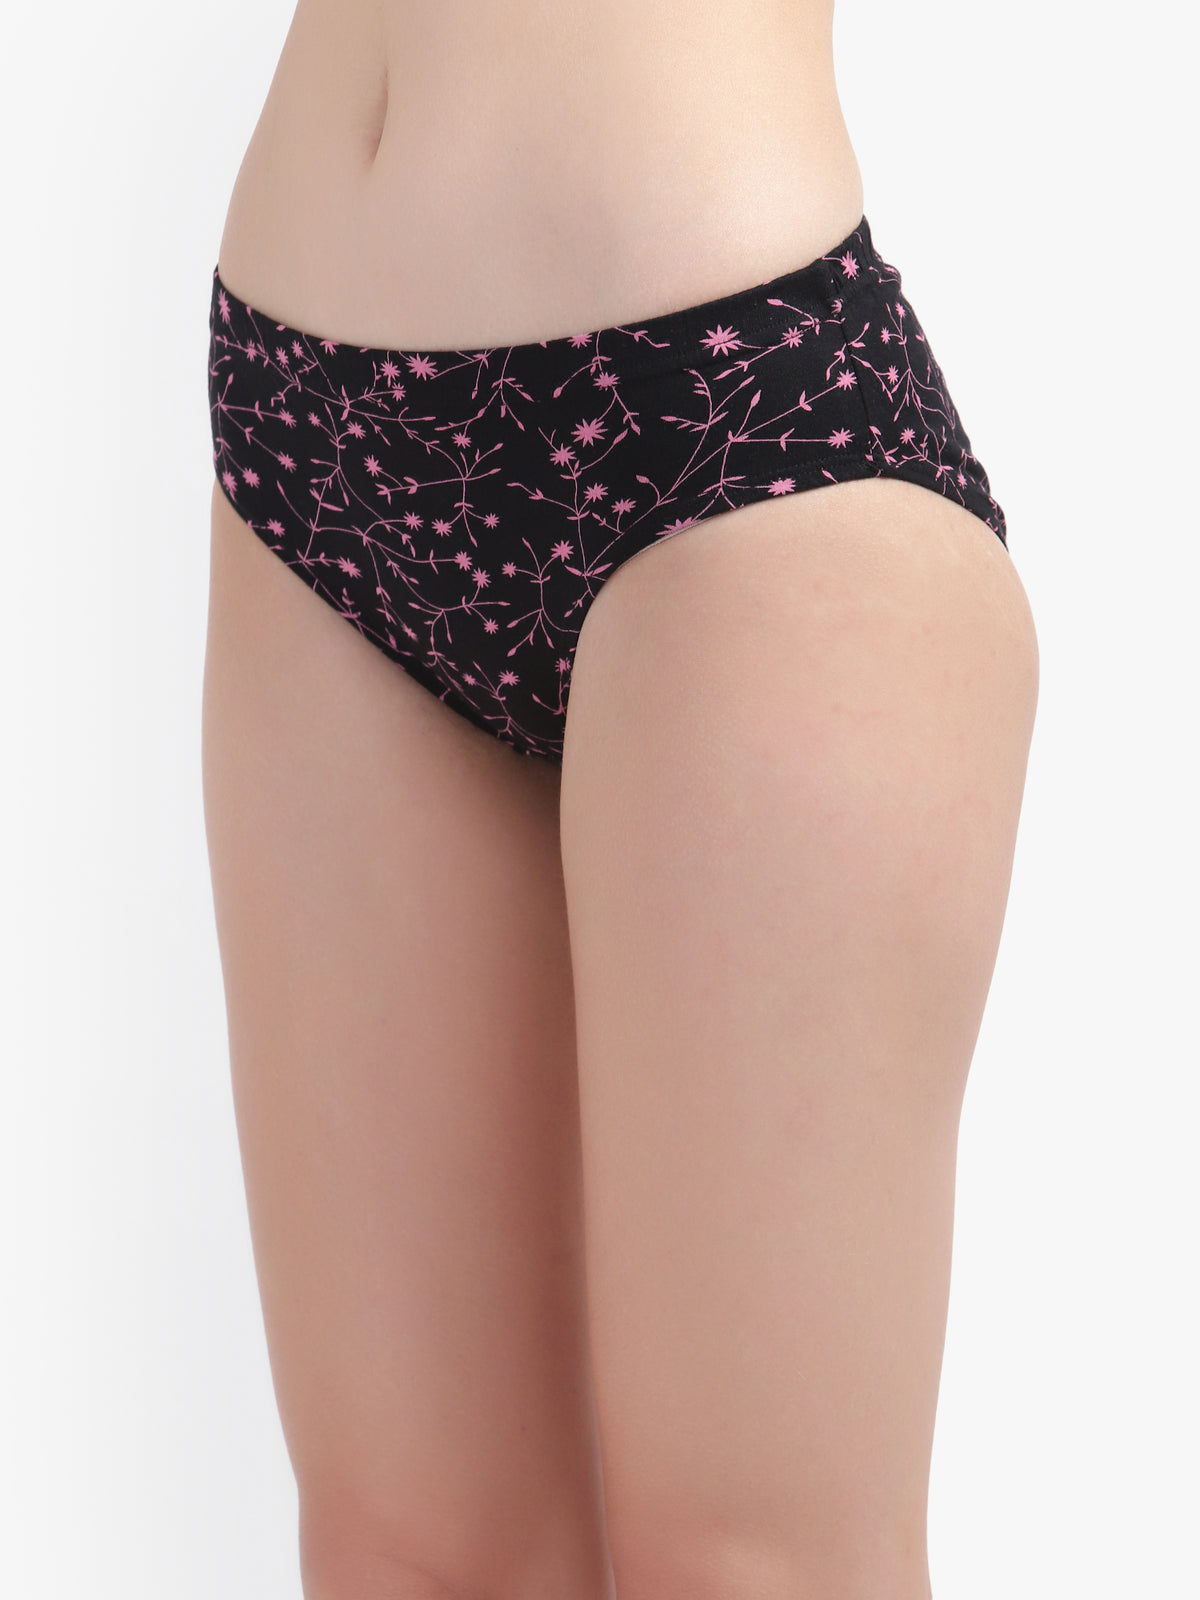 Assorted Printed Black Cotton Women Panty